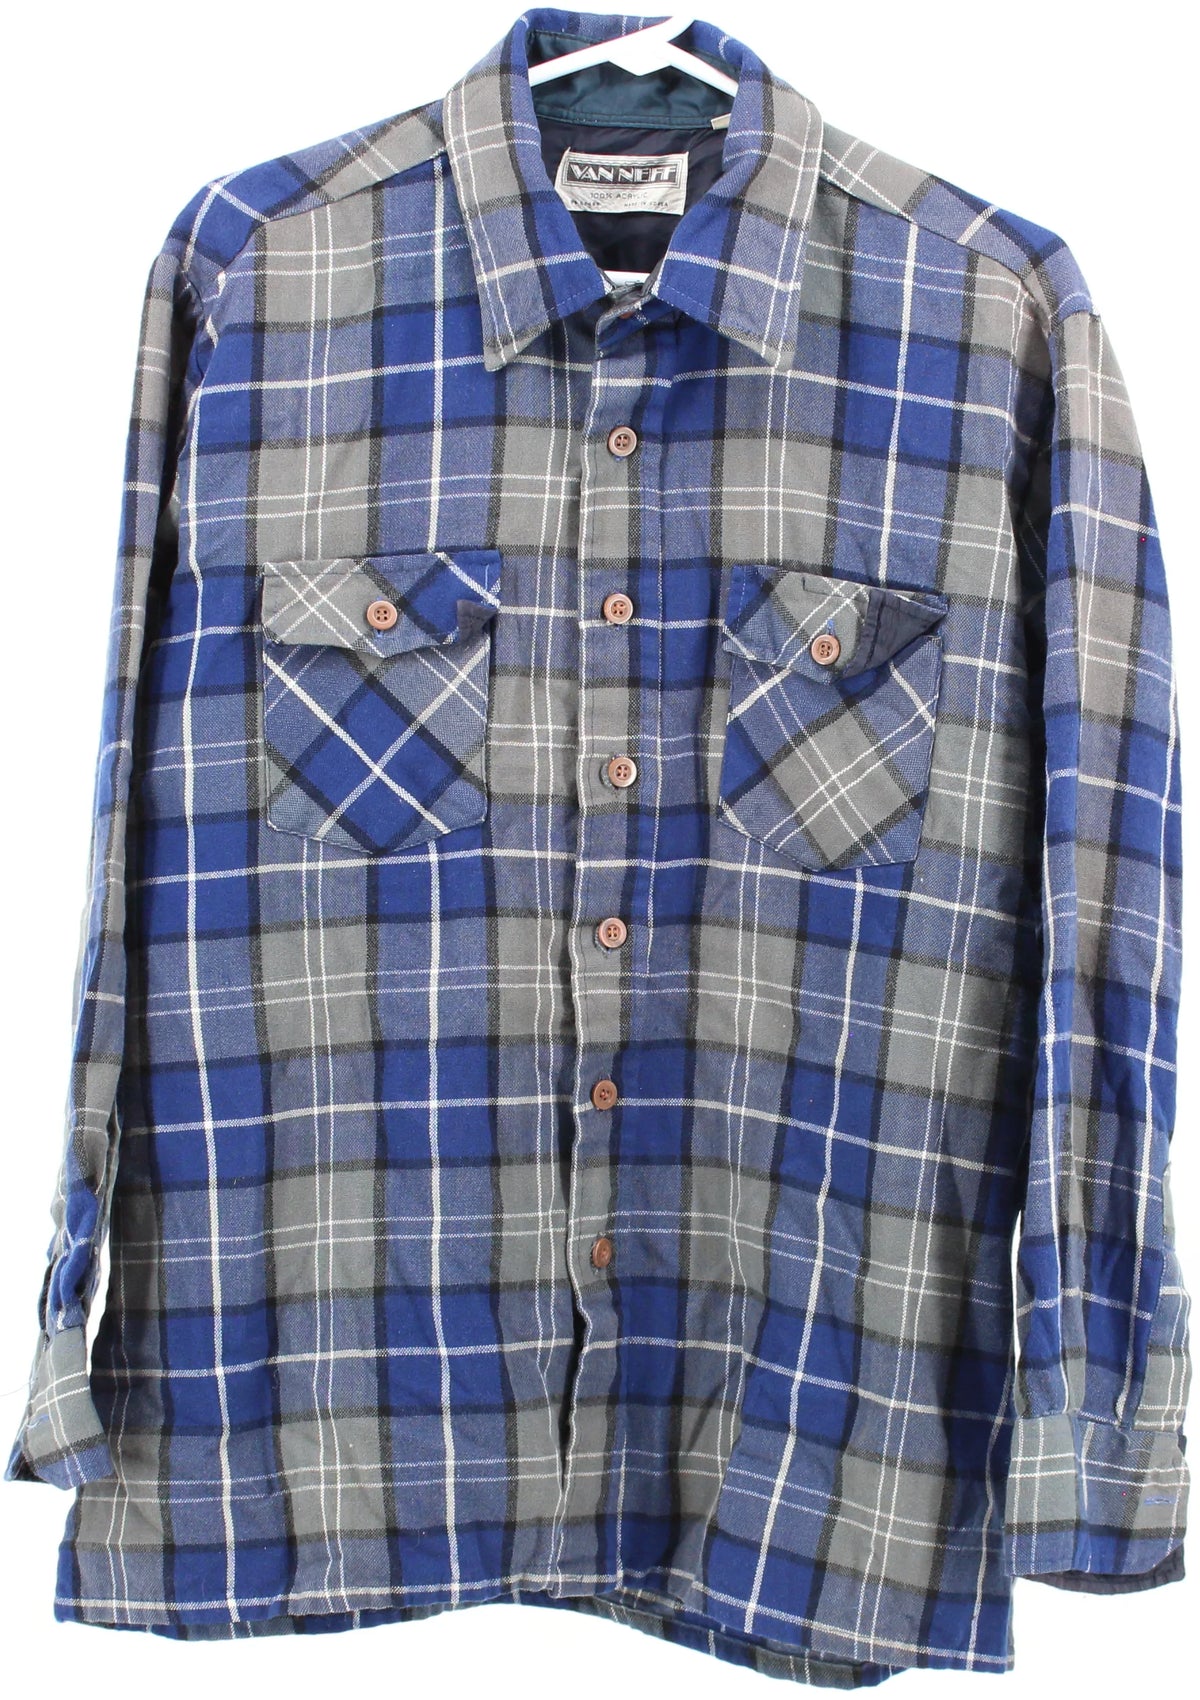 Vanneff Blue and Grey Plaid Flannel Shirt